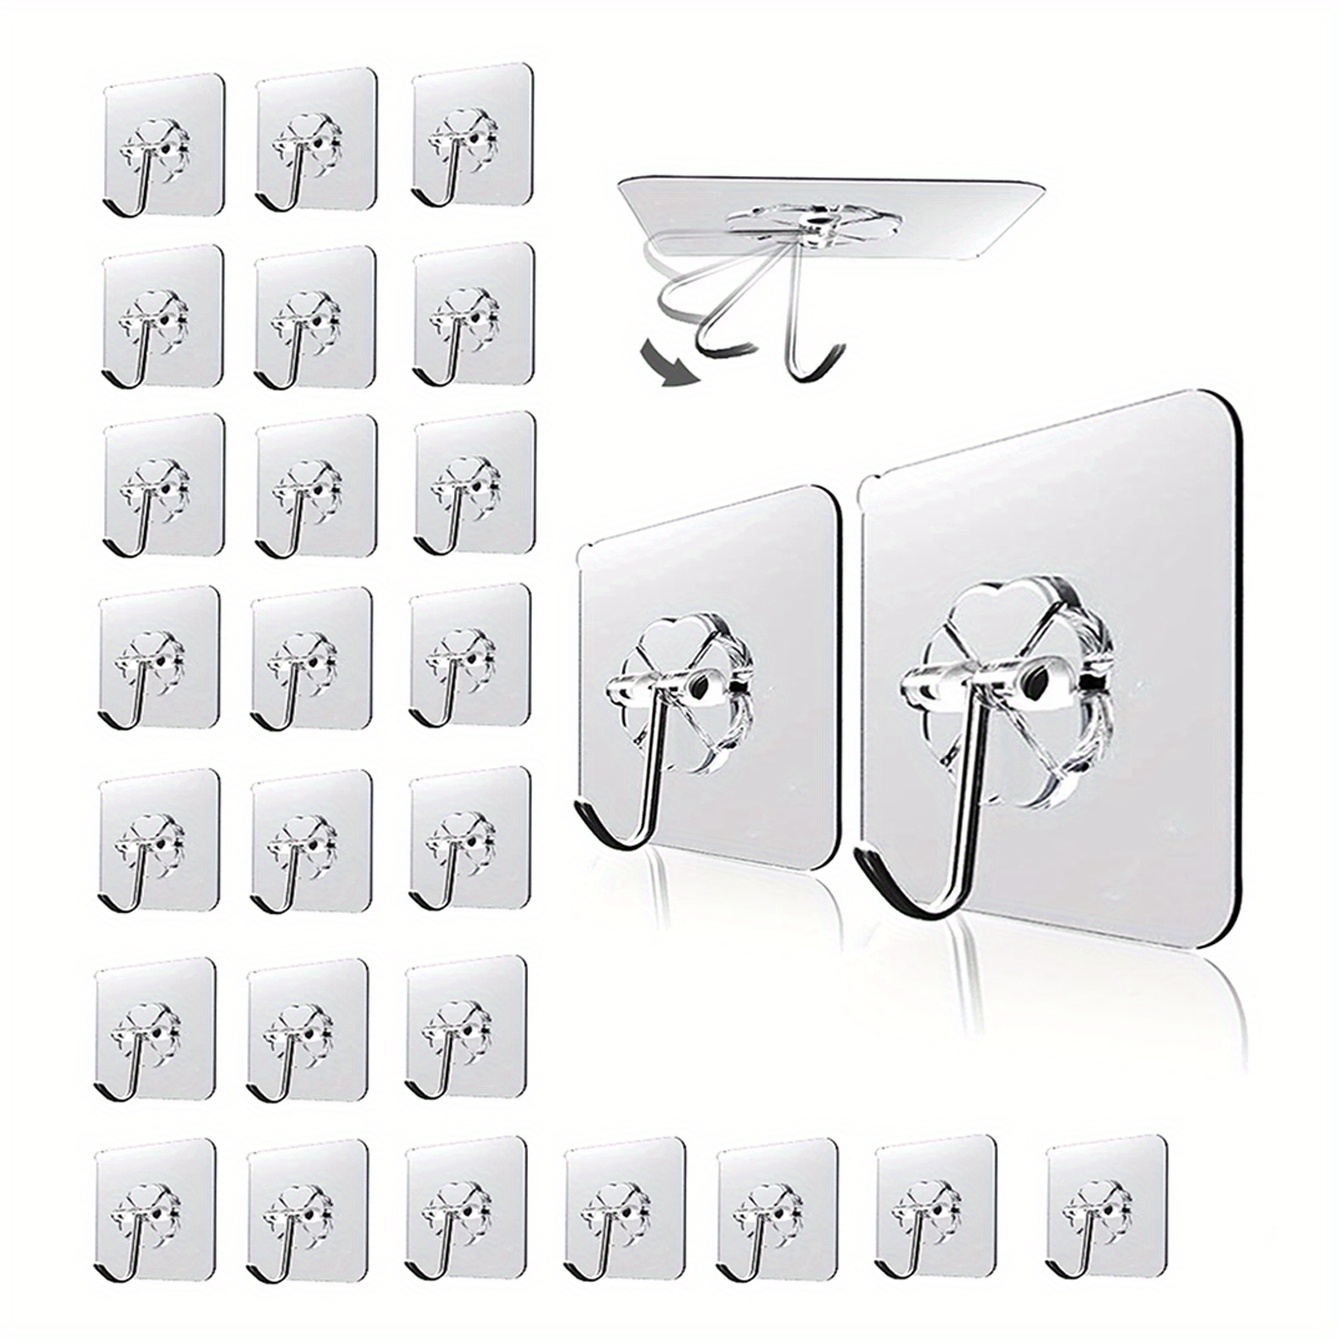 1pc Practical Adhesive Hook, Multifunctional Hooks, Transparent, Non Slip,  And Scratch Free Hooks, Utensils Hooks, Bags, And Clothes Hooks, High-quality & Affordable